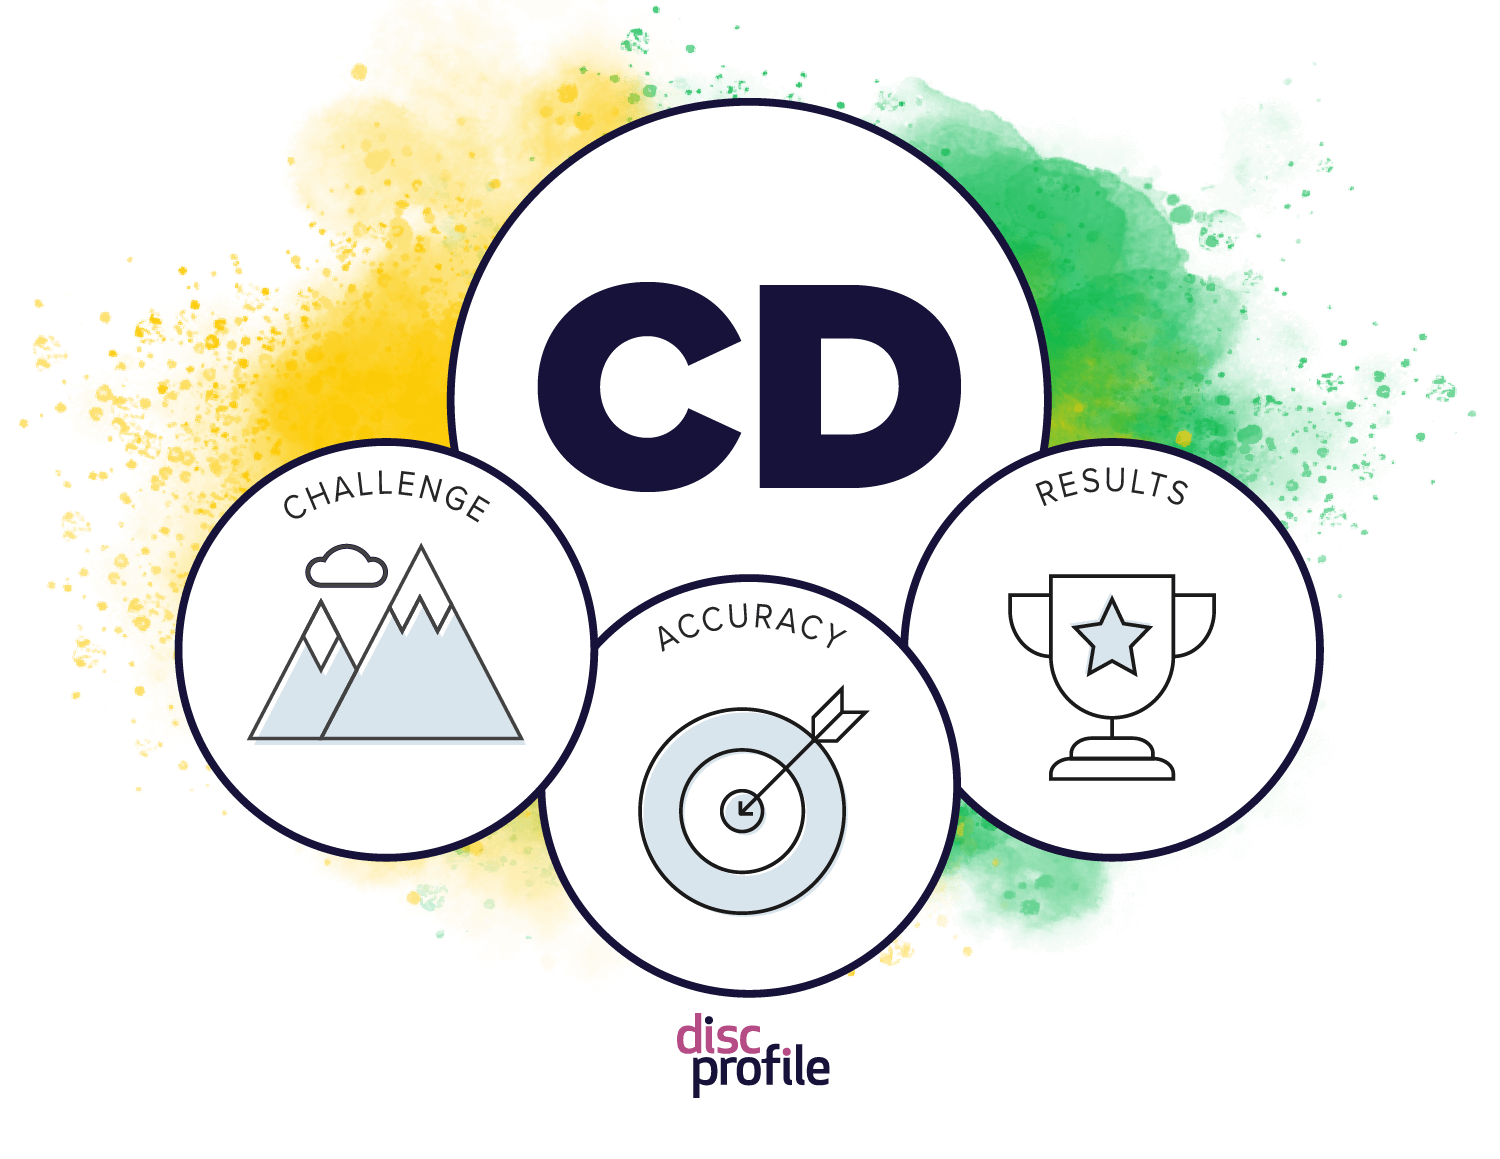 CD style image with these priorities: challenge, accuracy, and results